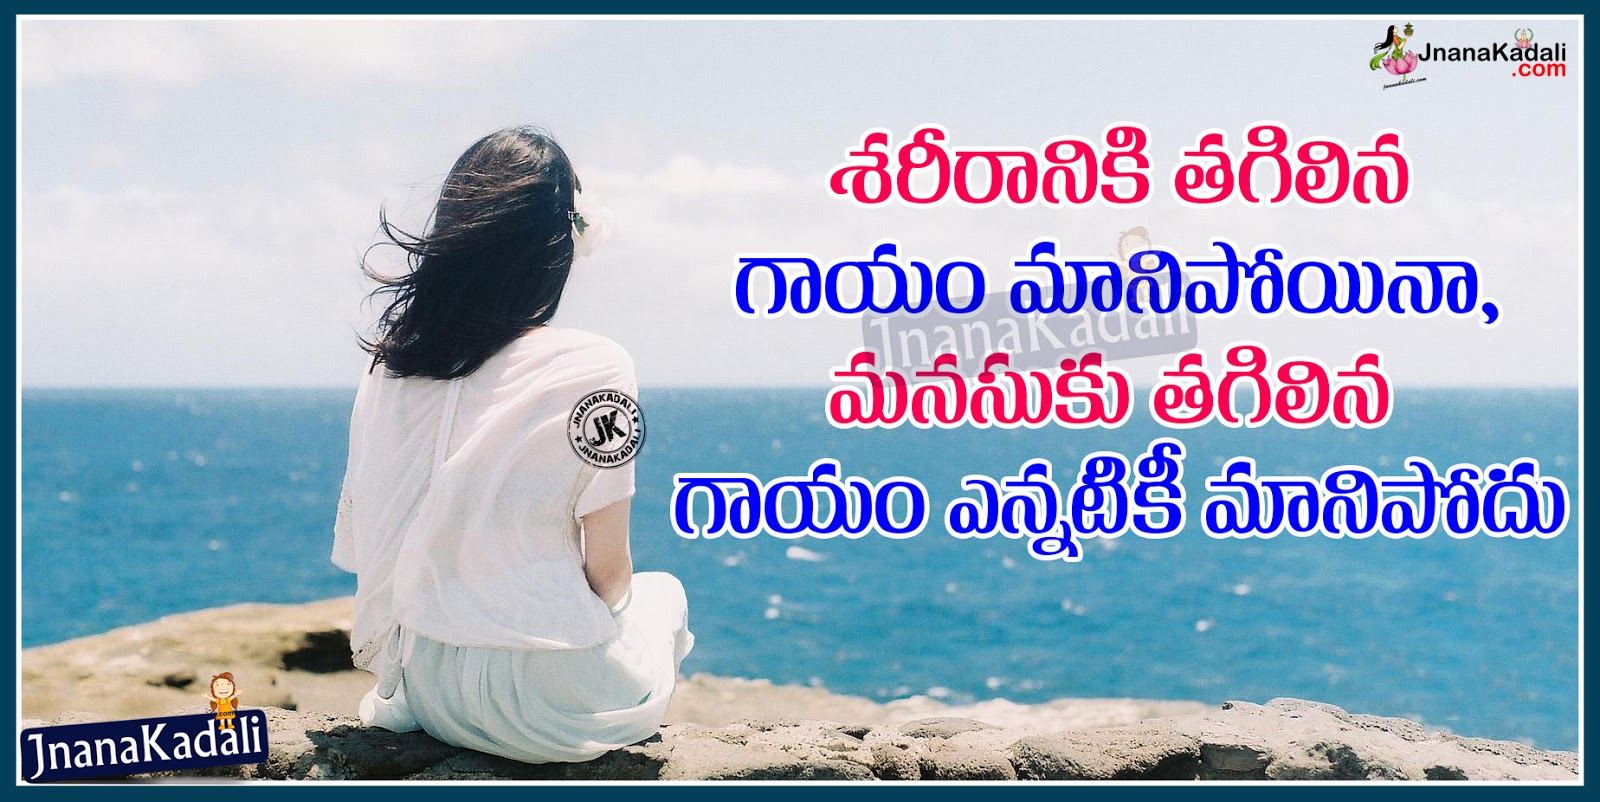 Sad Telugu Alone Death and Life Failure Quotes Great Love Failure Quotations and Best